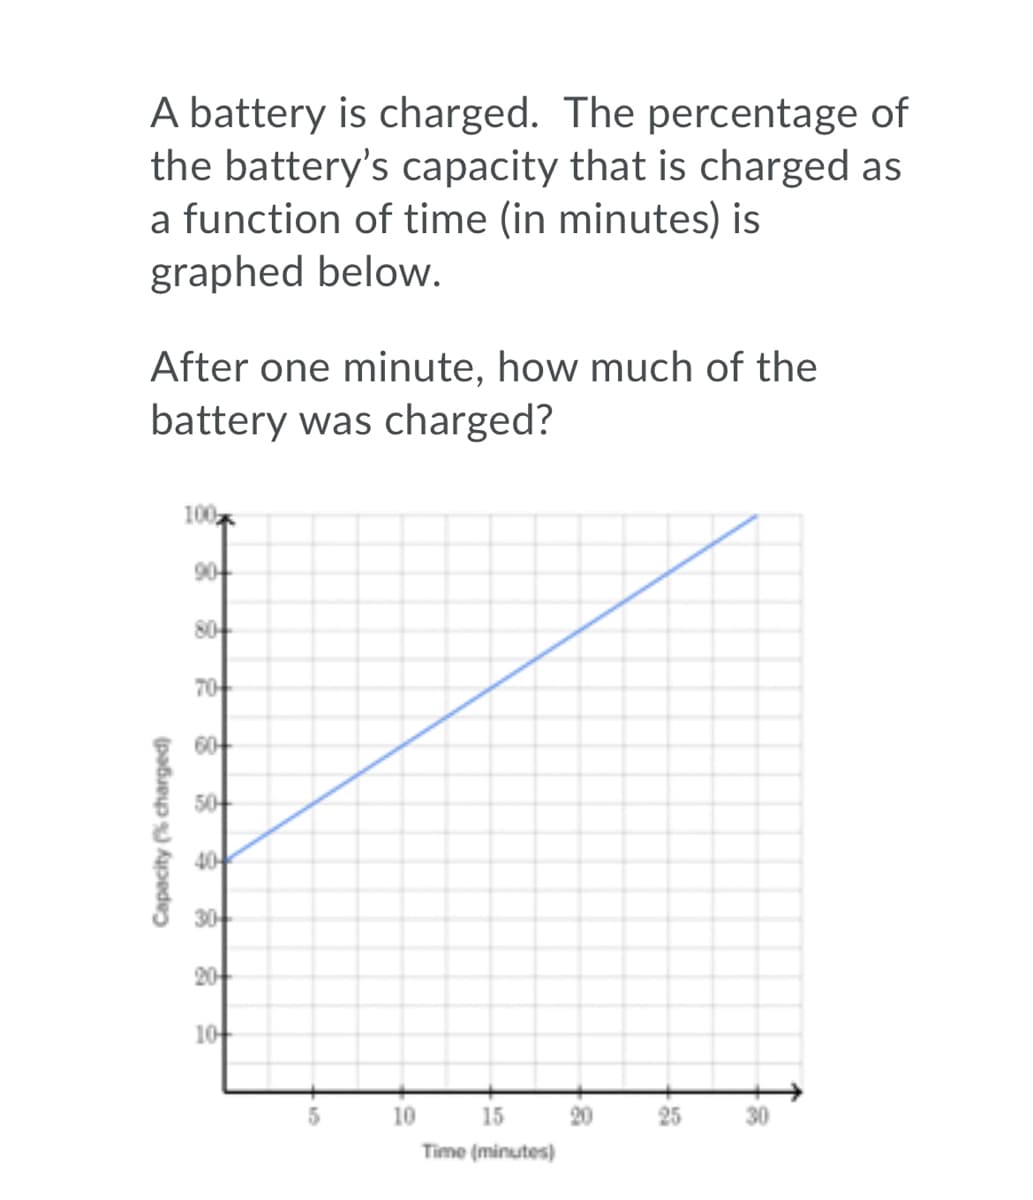 A battery is charged. The percentage of
the battery's capacity that is charged as
a function of time (in minutes) is
graphed below.
After one minute, how much of the
battery was charged?
100
90
80
70
60
50
40
30
20
10
10
15
20
25
30
Time (minutes)
Capacity (% charged)
